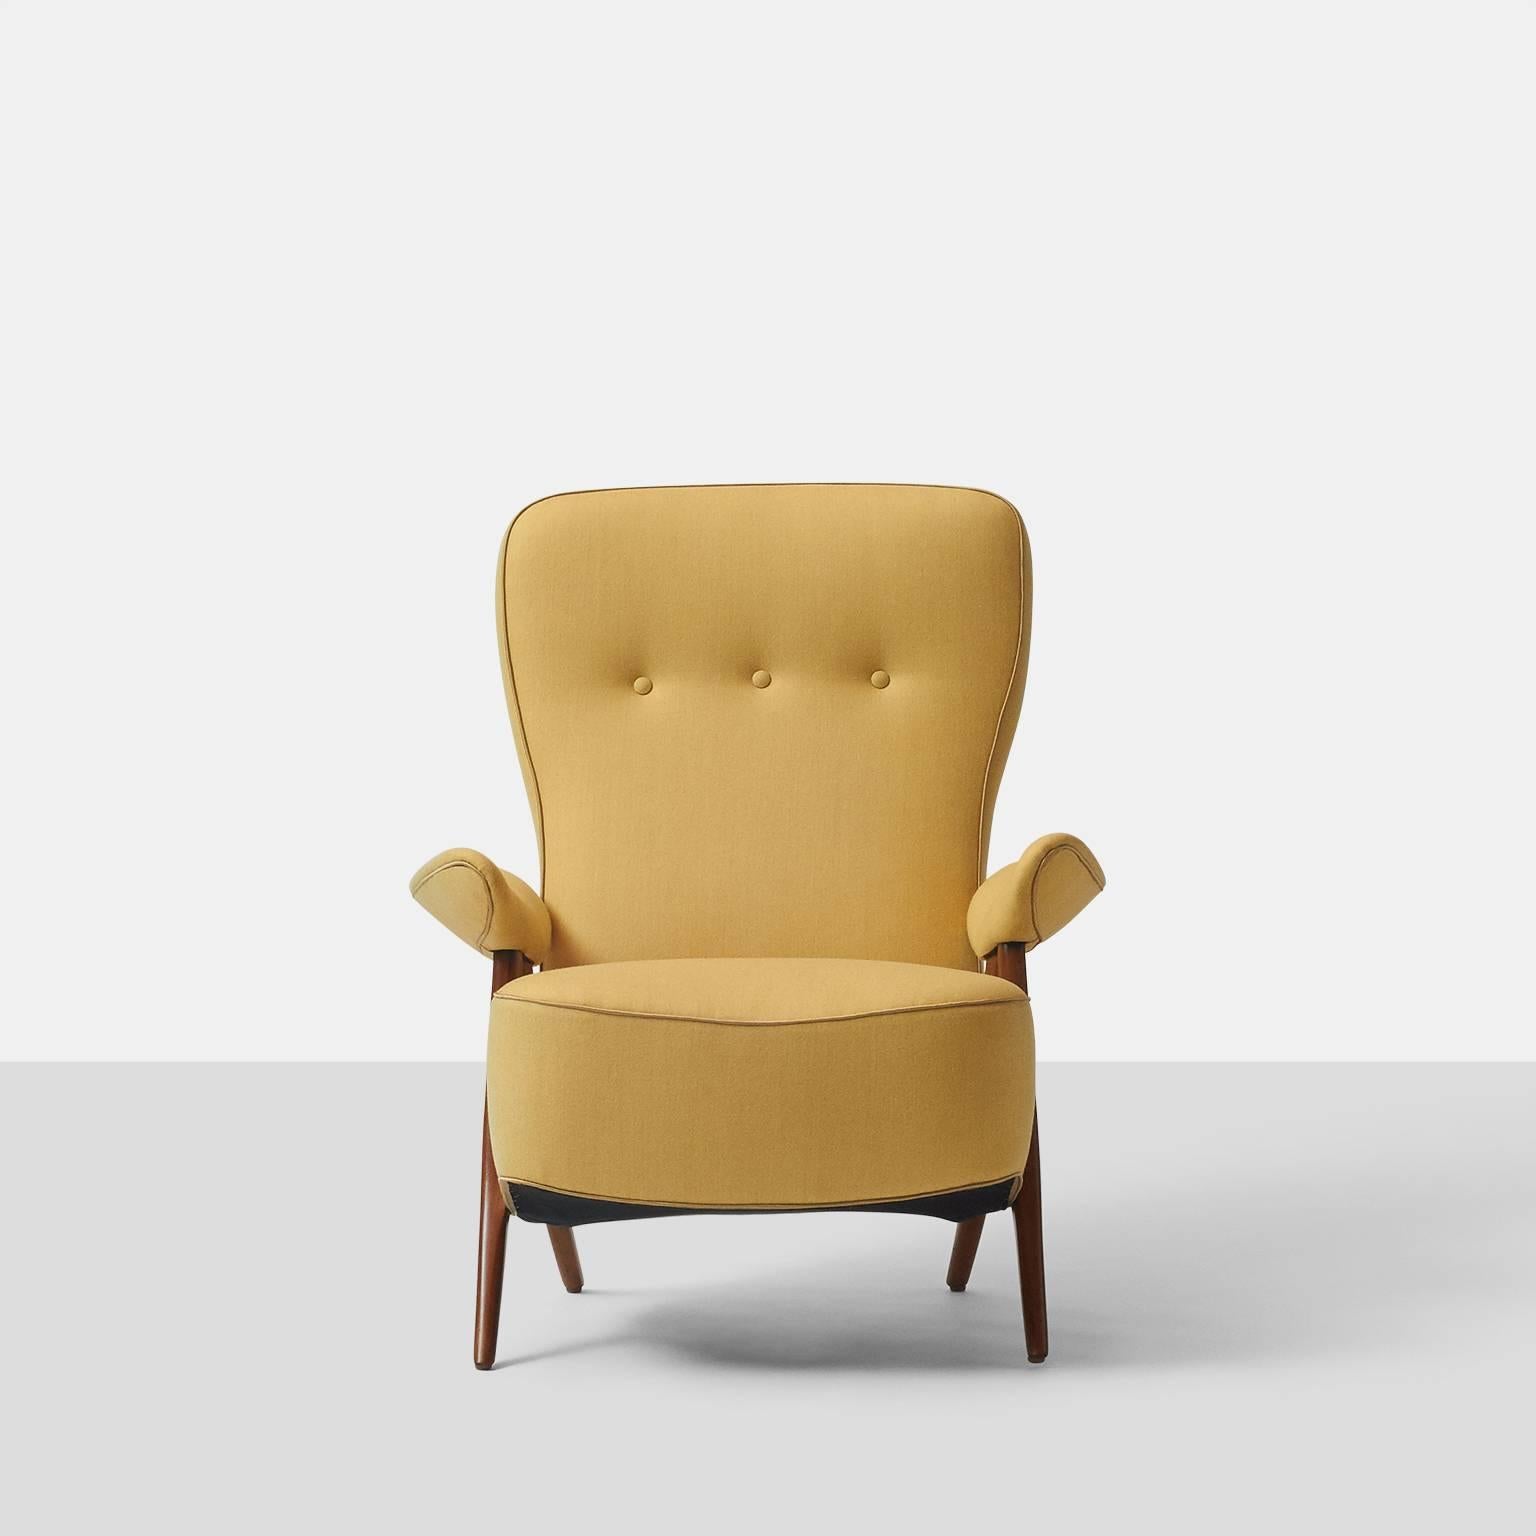 A lounge chair model #105 by Theo Ruth for Artifort made in 1950, also known as the hair pin chair. The chair has been completely restored in a wool suit fabric from Holland & Sherry with contrast silk trim. Retains the original brass Artifort label.